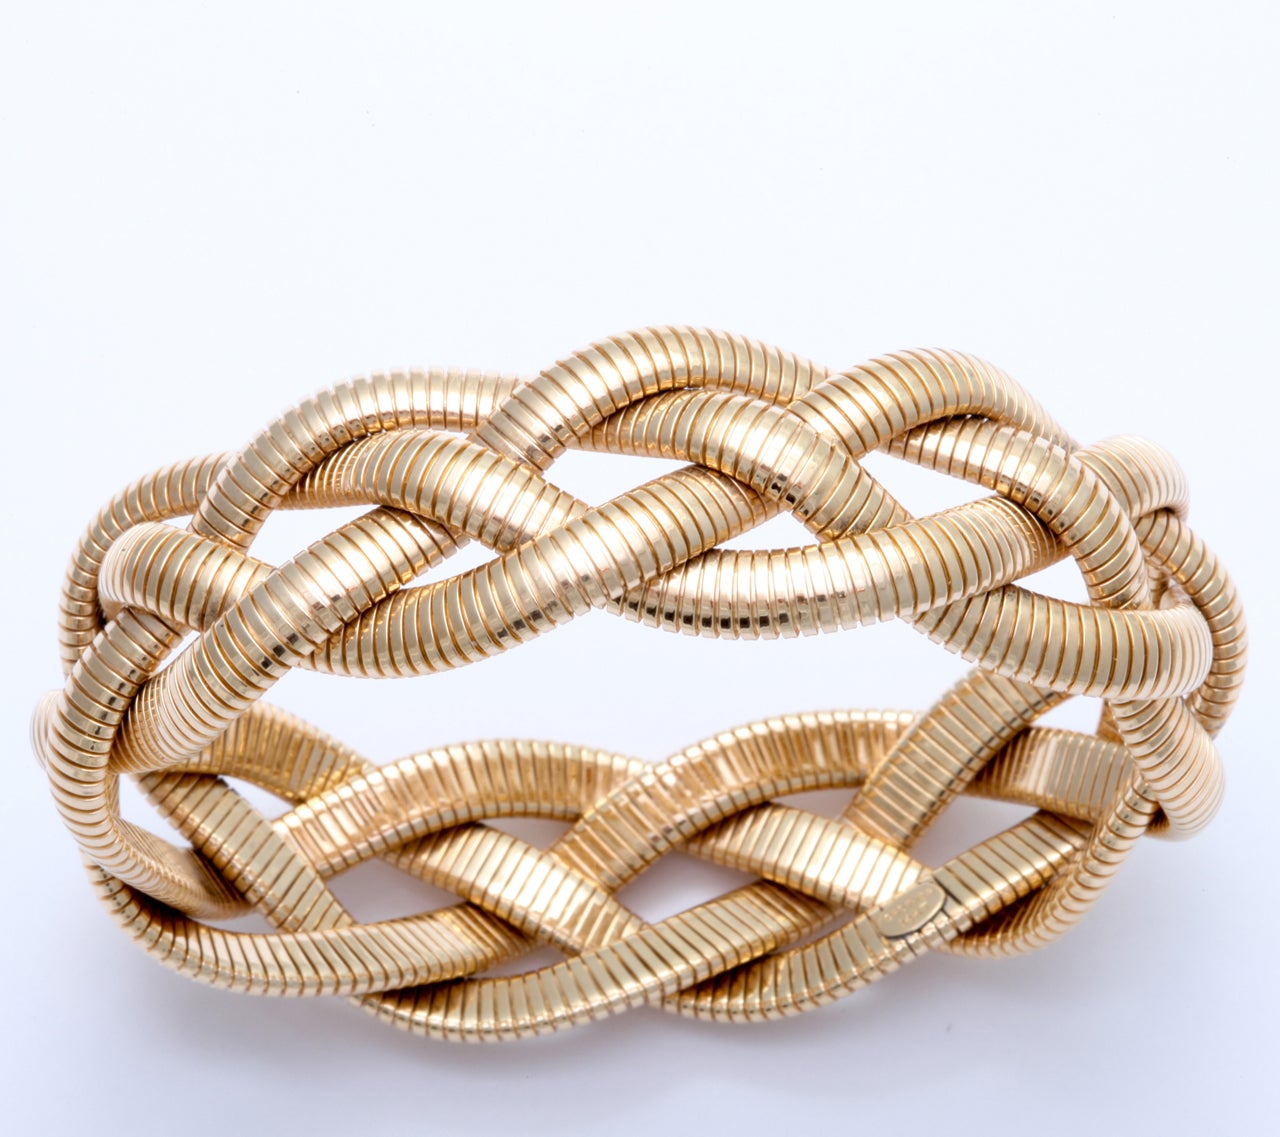 4 strand braided bracelet each strand 5.5 millimeters
20 millimeters at the widest point
54 grams
7